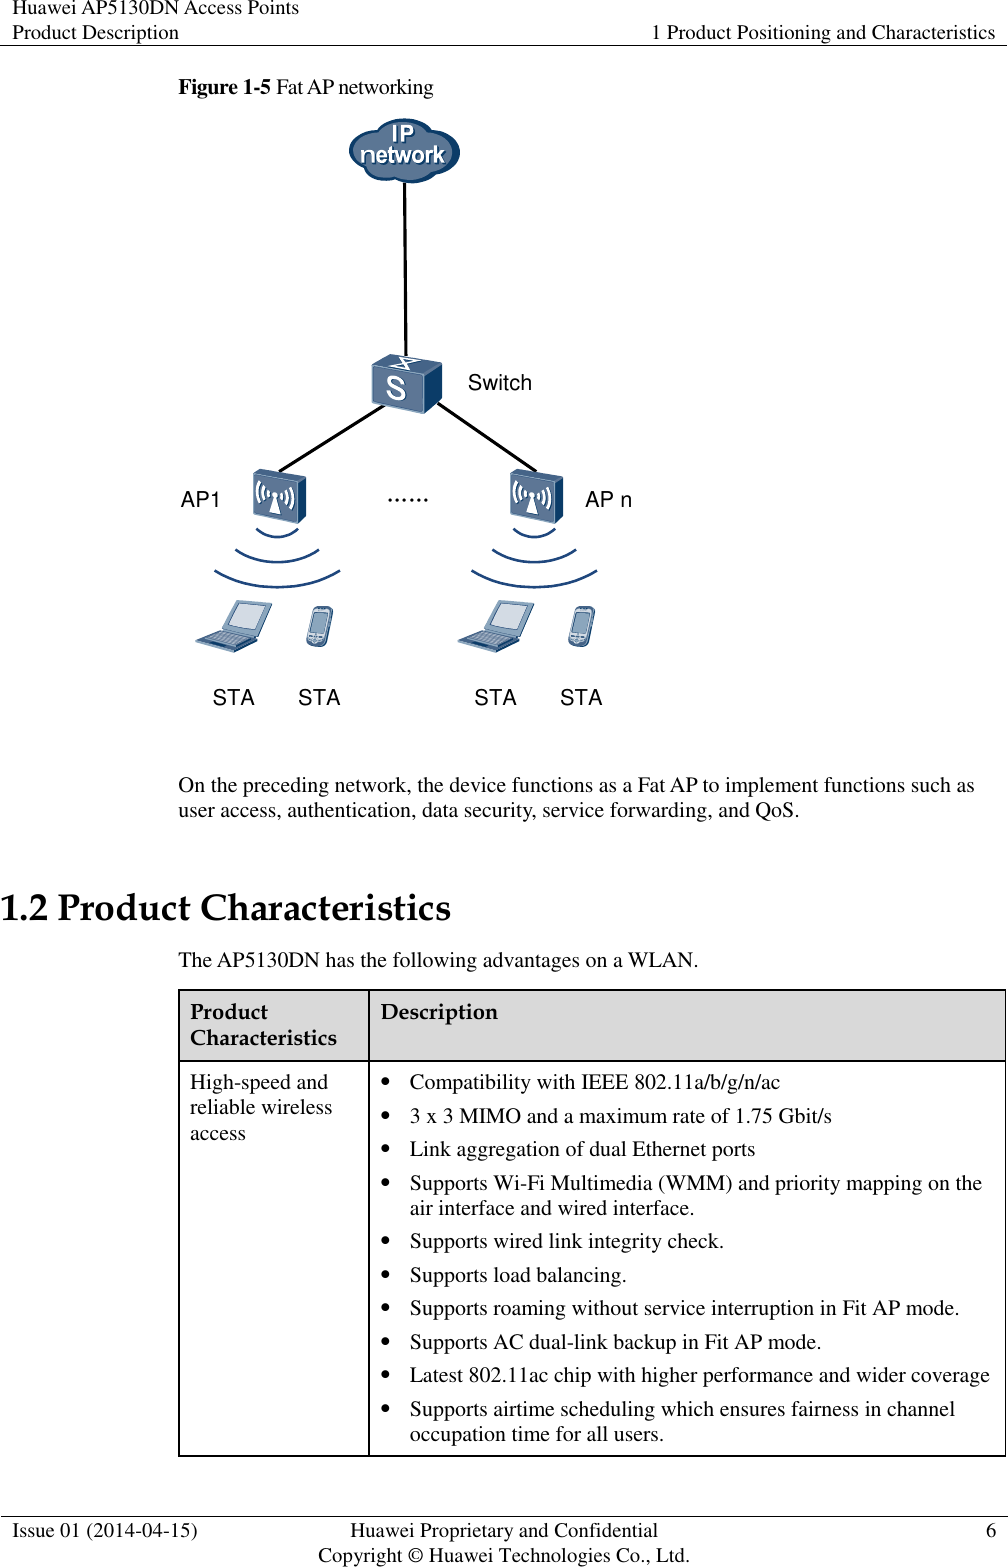 Huawei AP5130DN Access Points Product Description 1 Product Positioning and Characteristics  Issue 01 (2014-04-15) Huawei Proprietary and Confidential                                     Copyright © Huawei Technologies Co., Ltd. 6  Figure 1-5 Fat AP networking AP nAP1 ……SwitchSTA STASTA STA  On the preceding network, the device functions as a Fat AP to implement functions such as user access, authentication, data security, service forwarding, and QoS.   1.2 Product Characteristics The AP5130DN has the following advantages on a WLAN. Product Characteristics Description High-speed and reliable wireless access  Compatibility with IEEE 802.11a/b/g/n/ac  3 x 3 MIMO and a maximum rate of 1.75 Gbit/s  Link aggregation of dual Ethernet ports  Supports Wi-Fi Multimedia (WMM) and priority mapping on the air interface and wired interface.  Supports wired link integrity check.  Supports load balancing.  Supports roaming without service interruption in Fit AP mode.  Supports AC dual-link backup in Fit AP mode.  Latest 802.11ac chip with higher performance and wider coverage  Supports airtime scheduling which ensures fairness in channel occupation time for all users. 